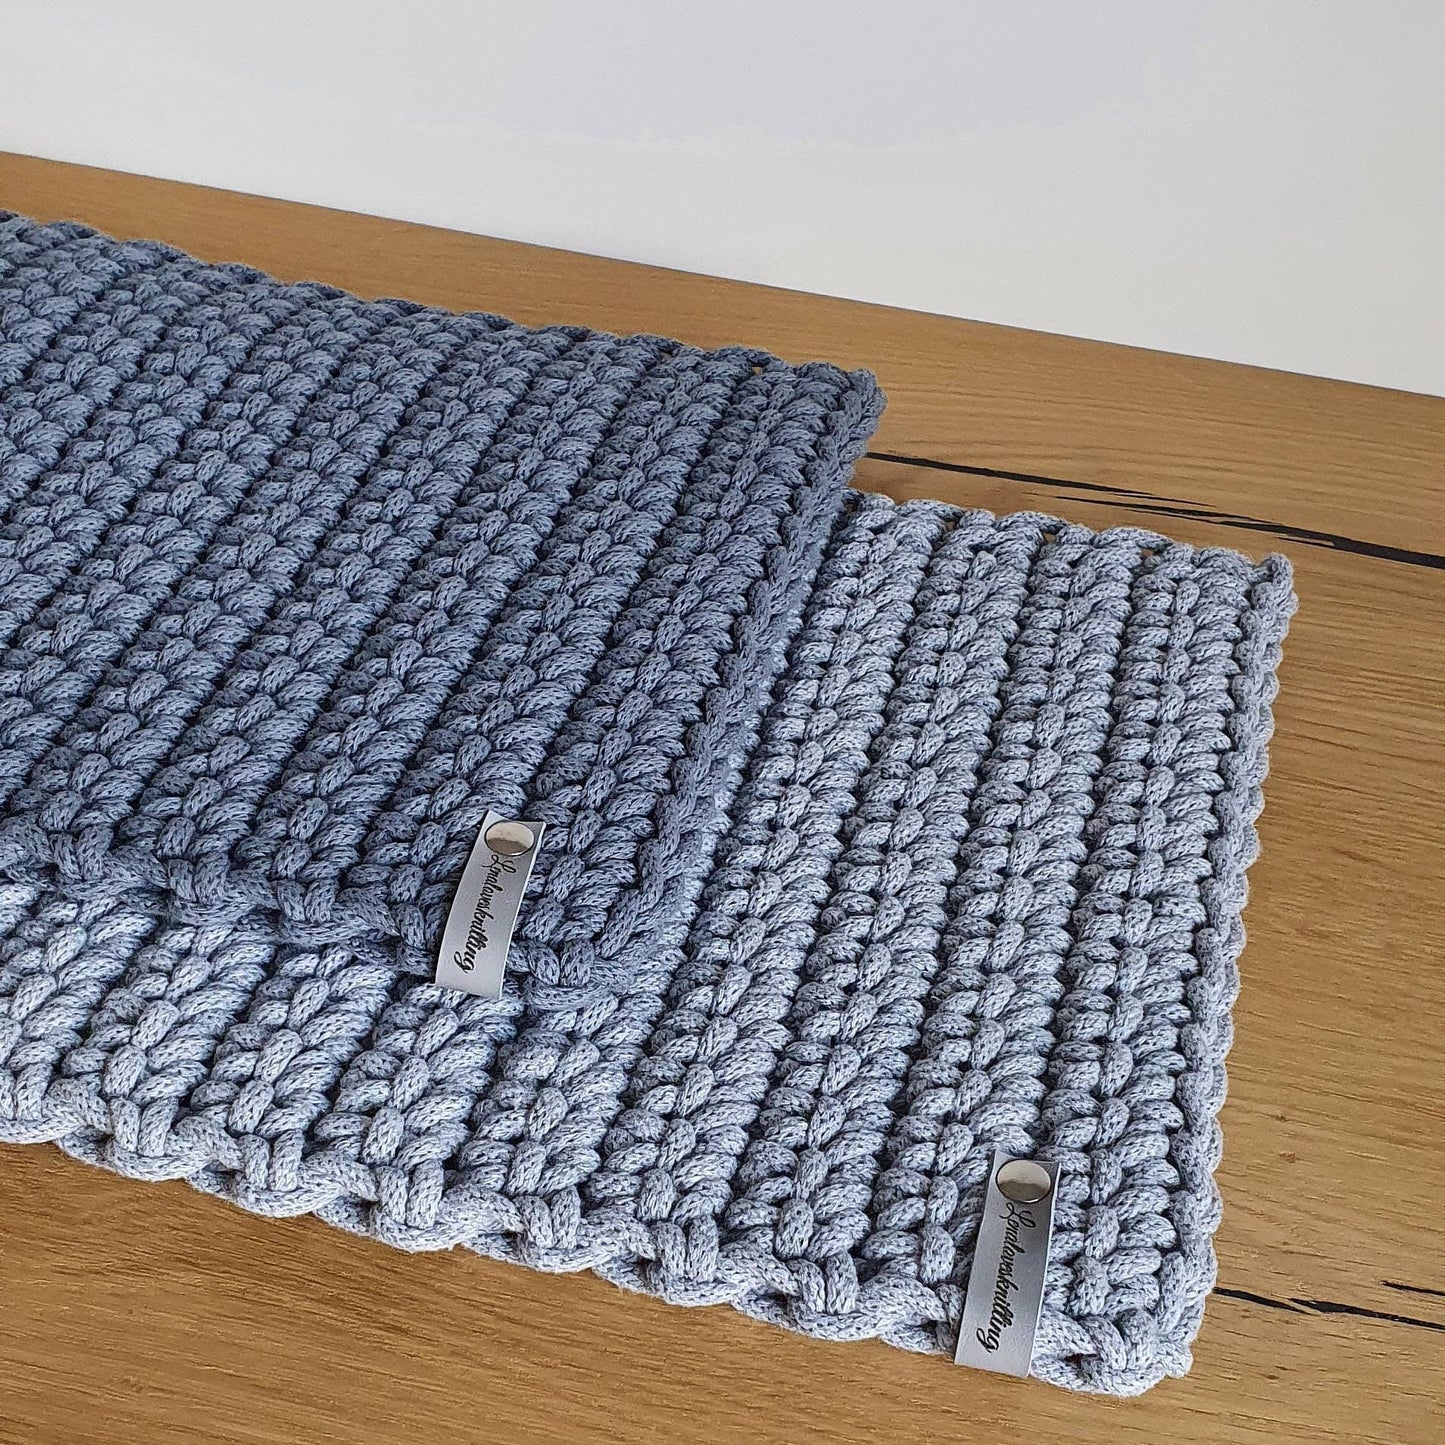 Crocheted rug made from 100% recycled cotton